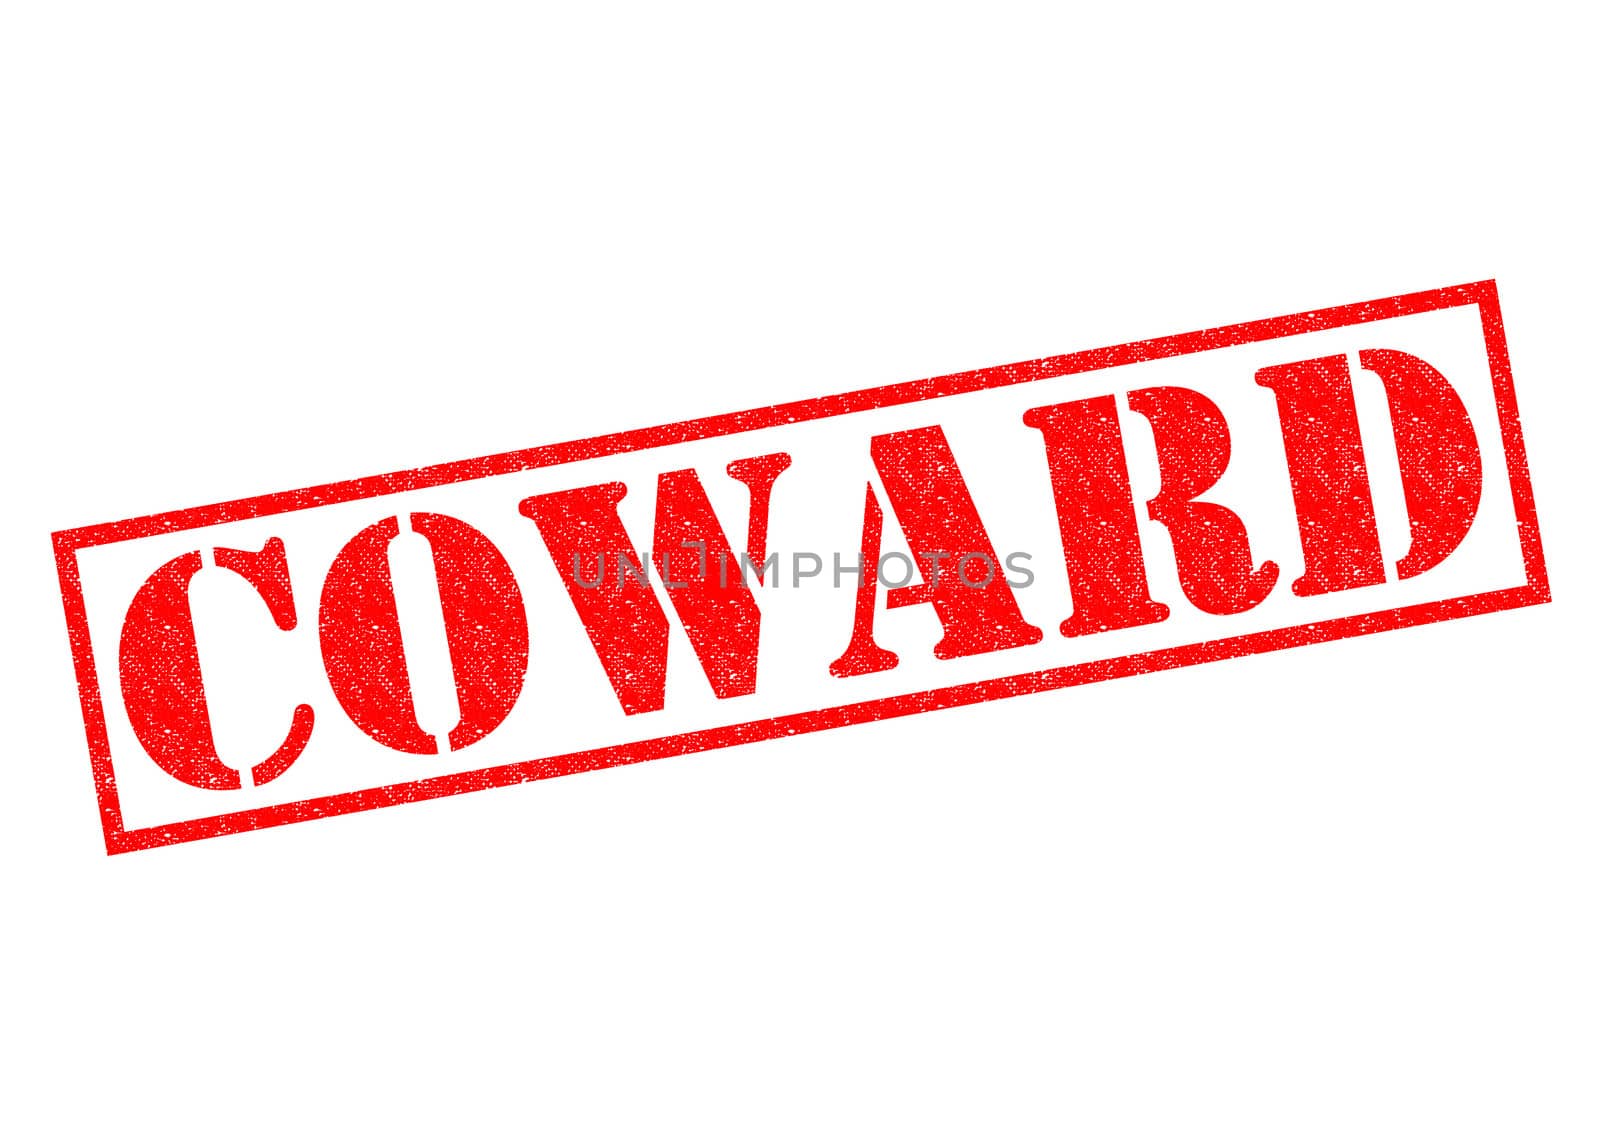 COWARD red Rubber Stamp over a white background.